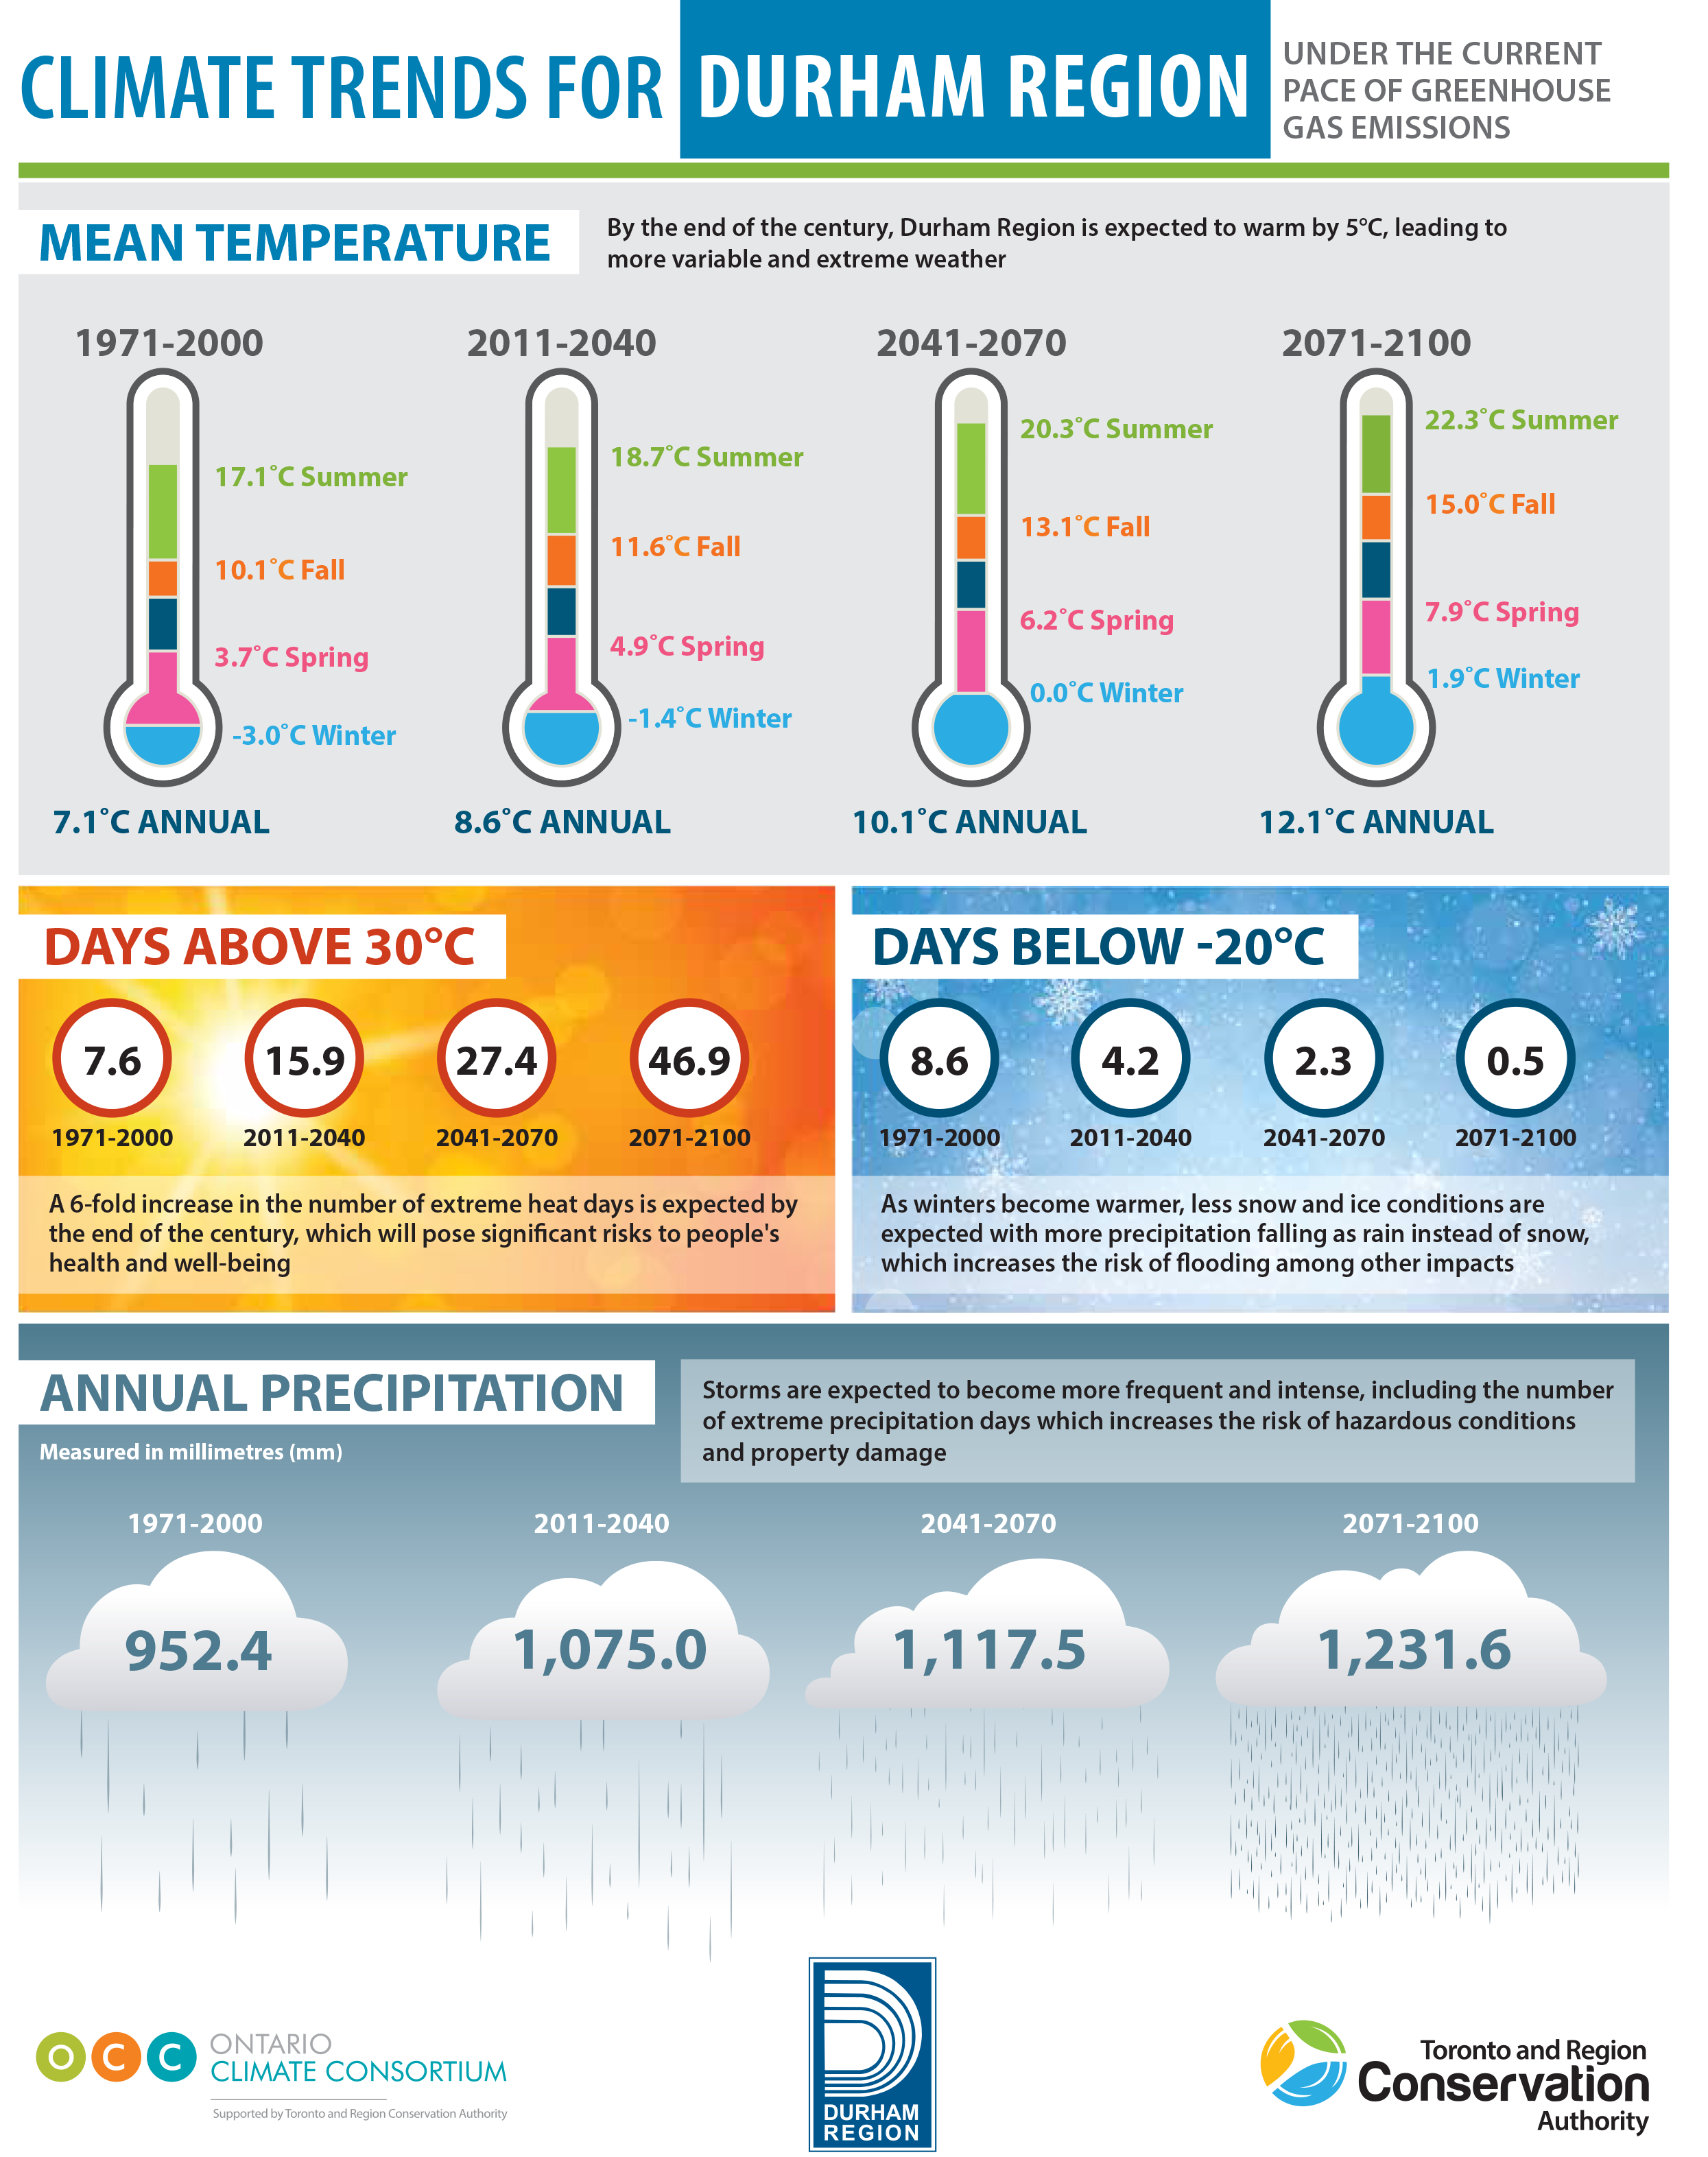 Summary of climate trends for Durham Region, including increasing temperatures and annual precipitation